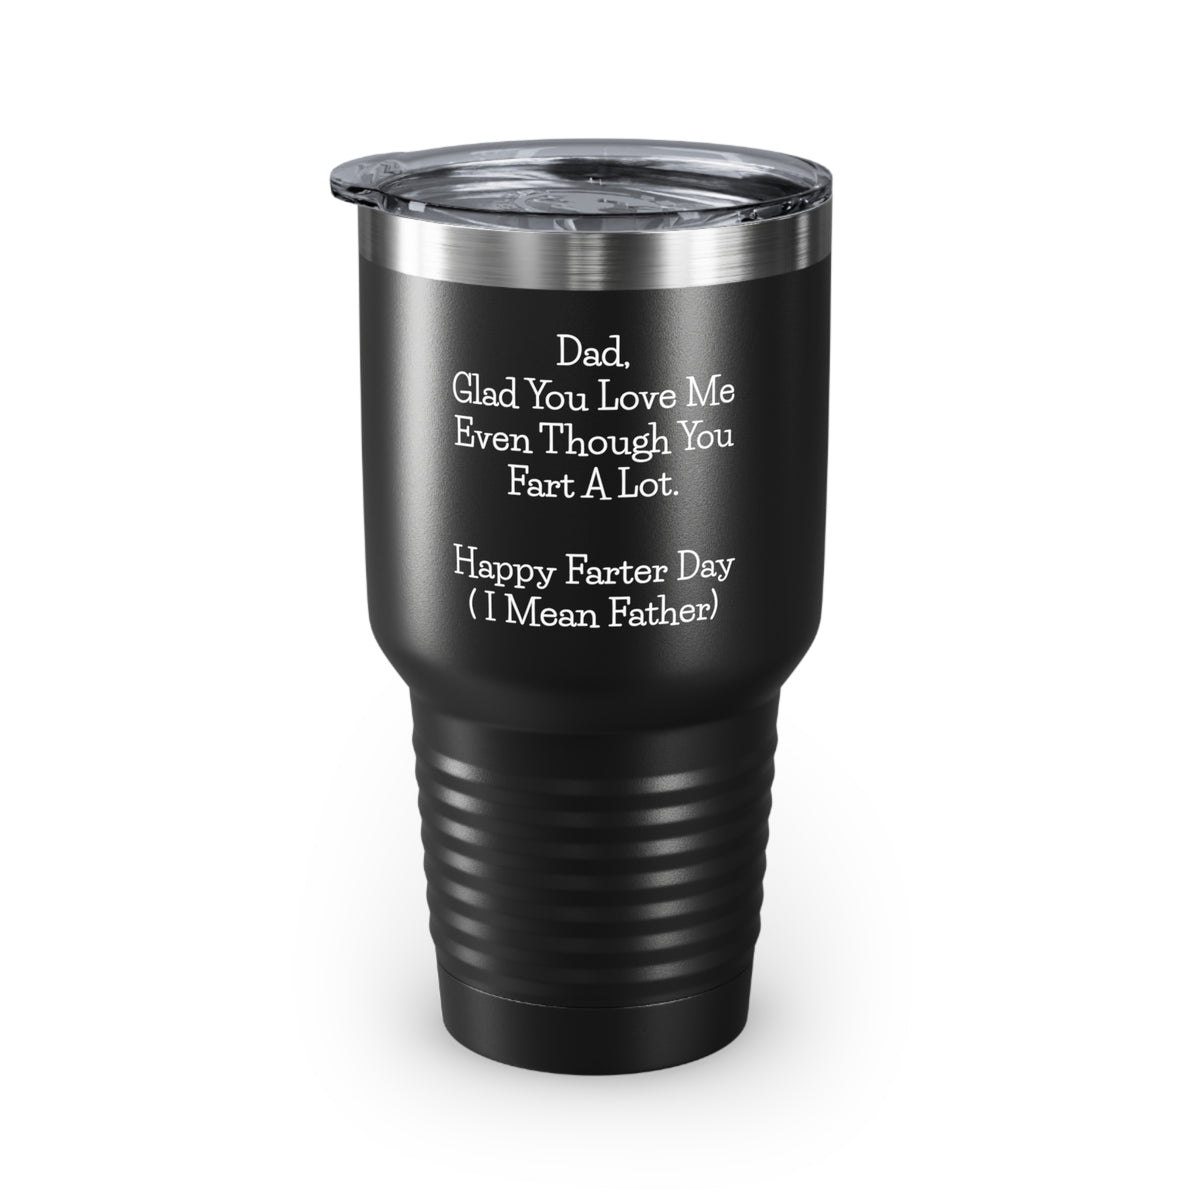 Dad 30oz Tumbler, Dad, Glad You Love Me Even Though You Fart A Lot. Happy Farter Day (I Mean Father), Black Insulated Cup For Father From Daughter Son